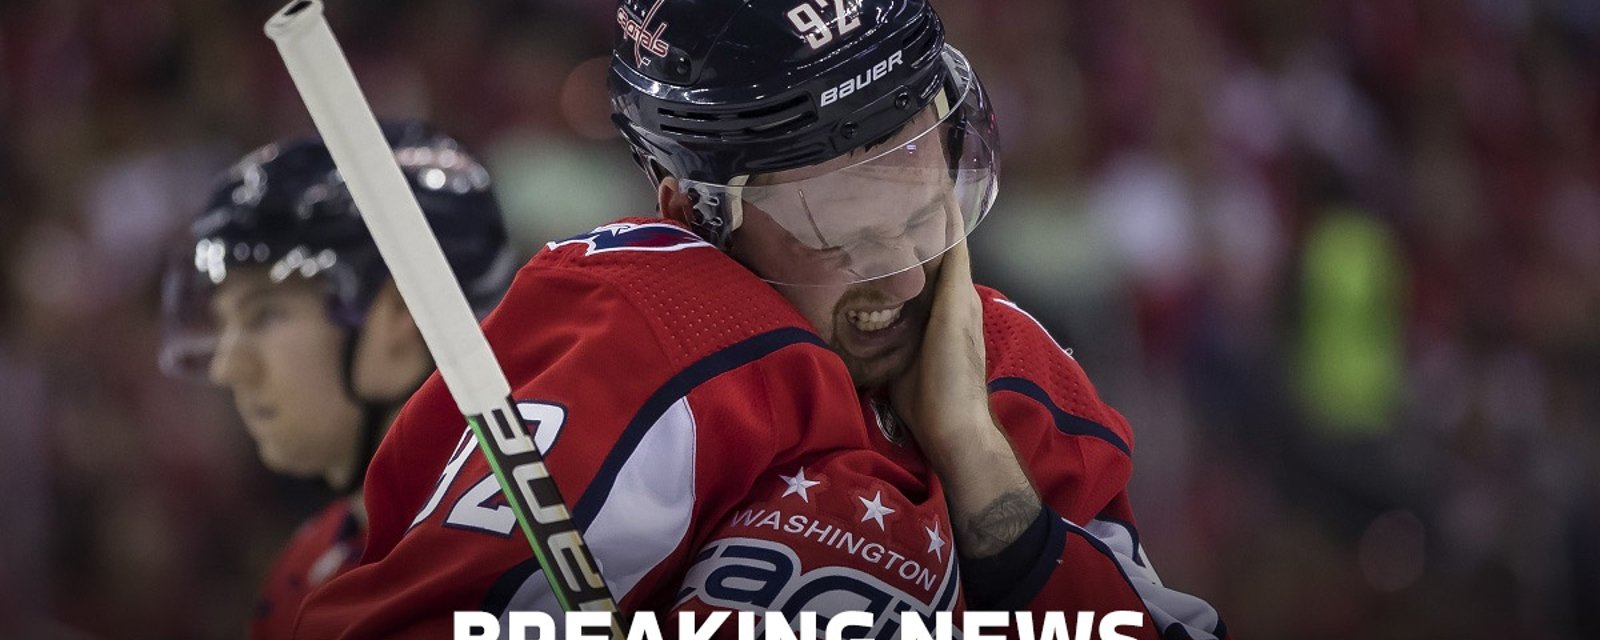 Evgeny Kuznetsov will be suspended by the NHL!